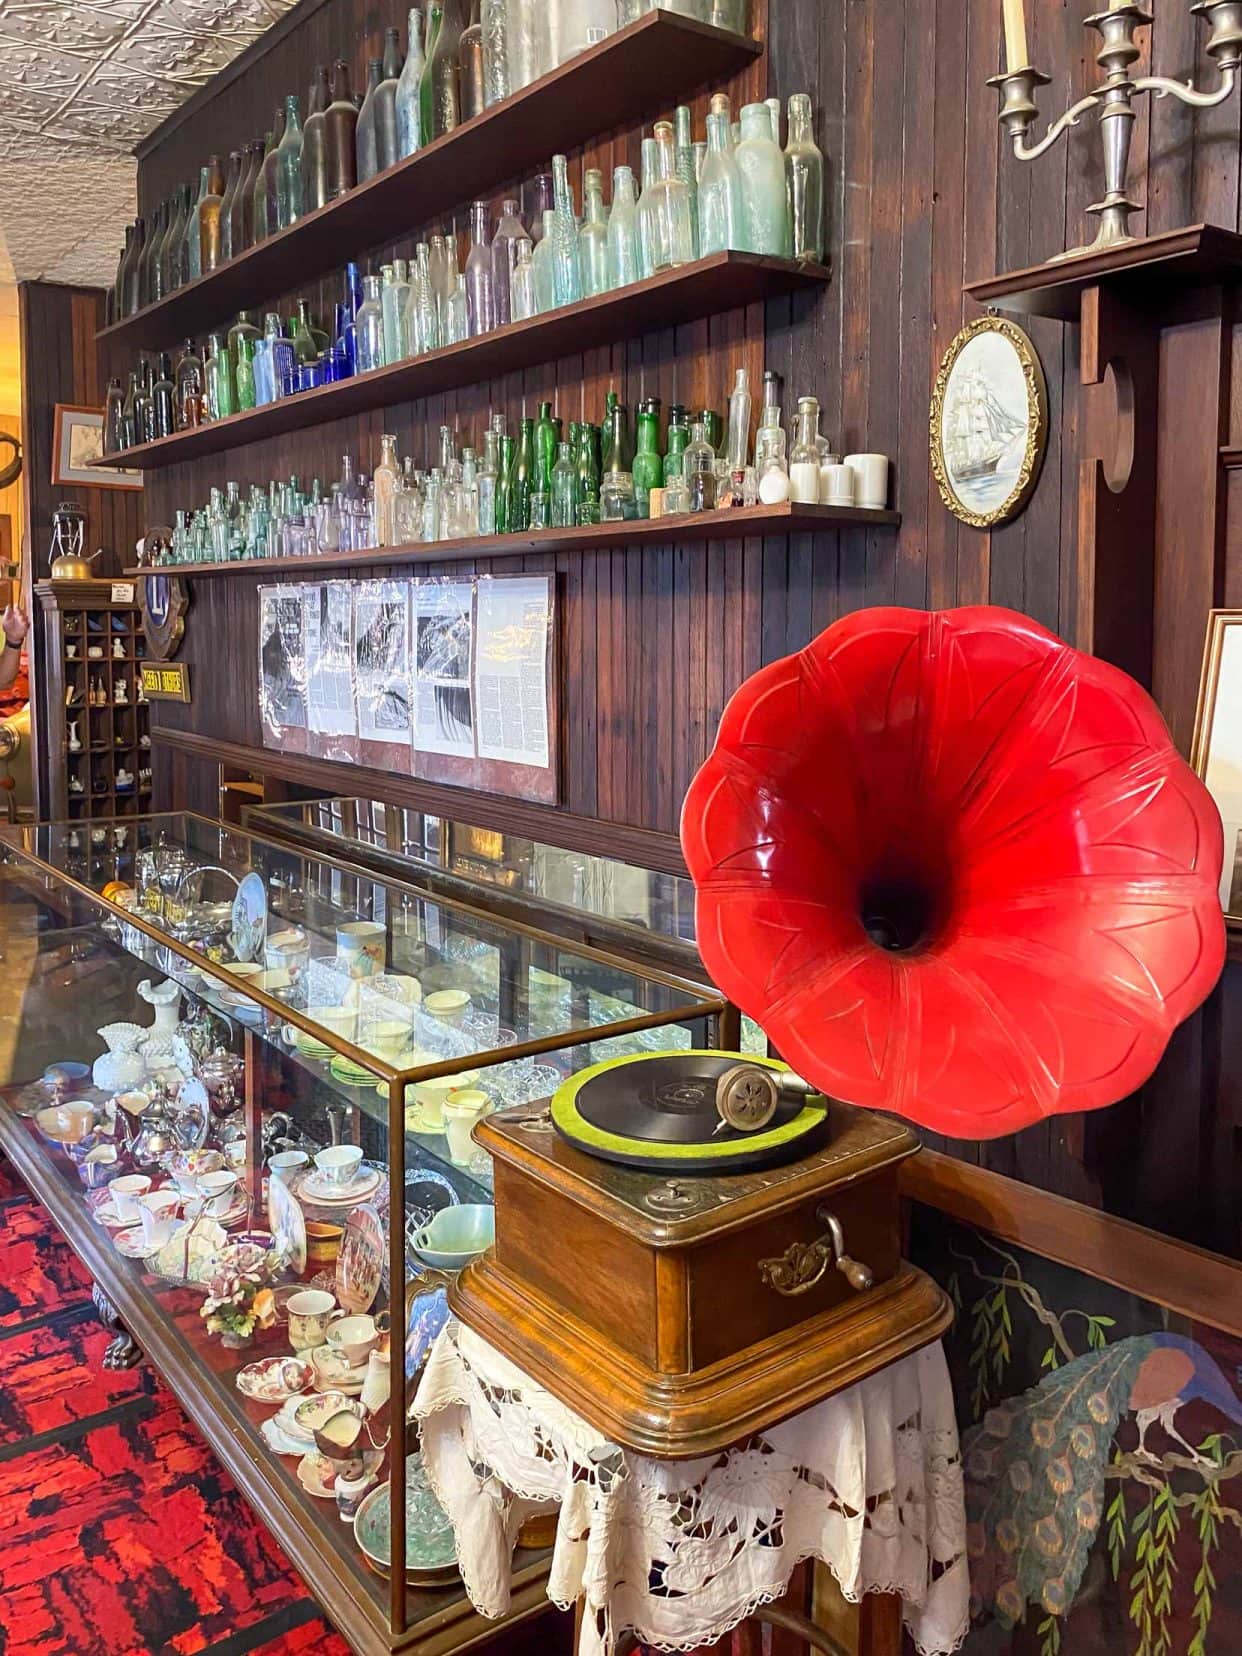 A gramphoe with a big red speaker and a shelf with old bottles and momentoes on it